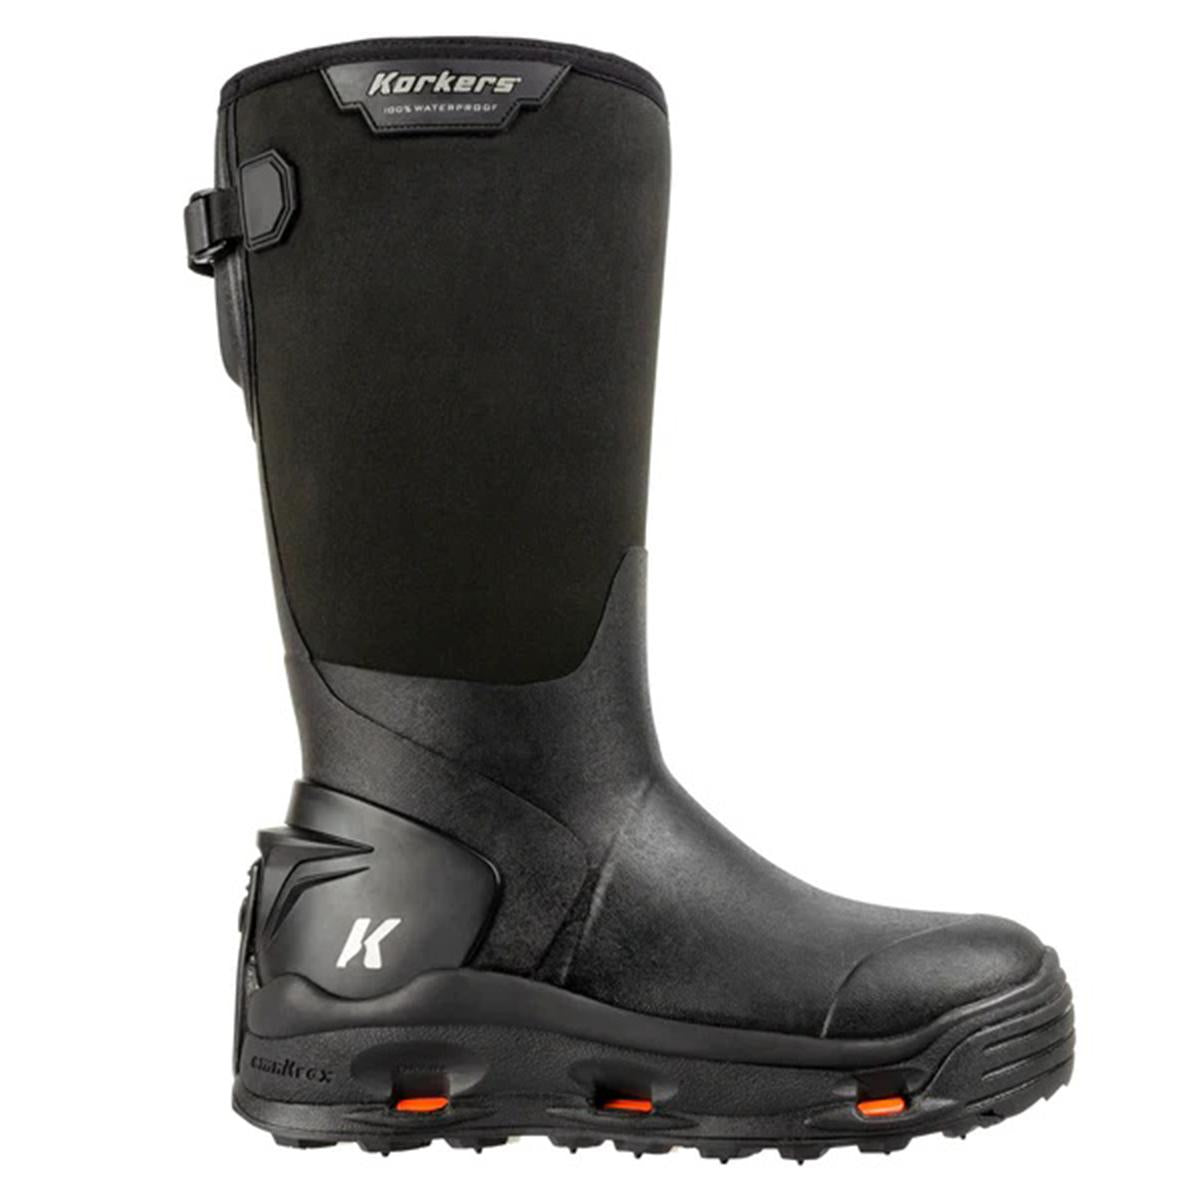 Korkers Men's Neo Storm 90 Outdoor Boots with Ninety Degree Sole